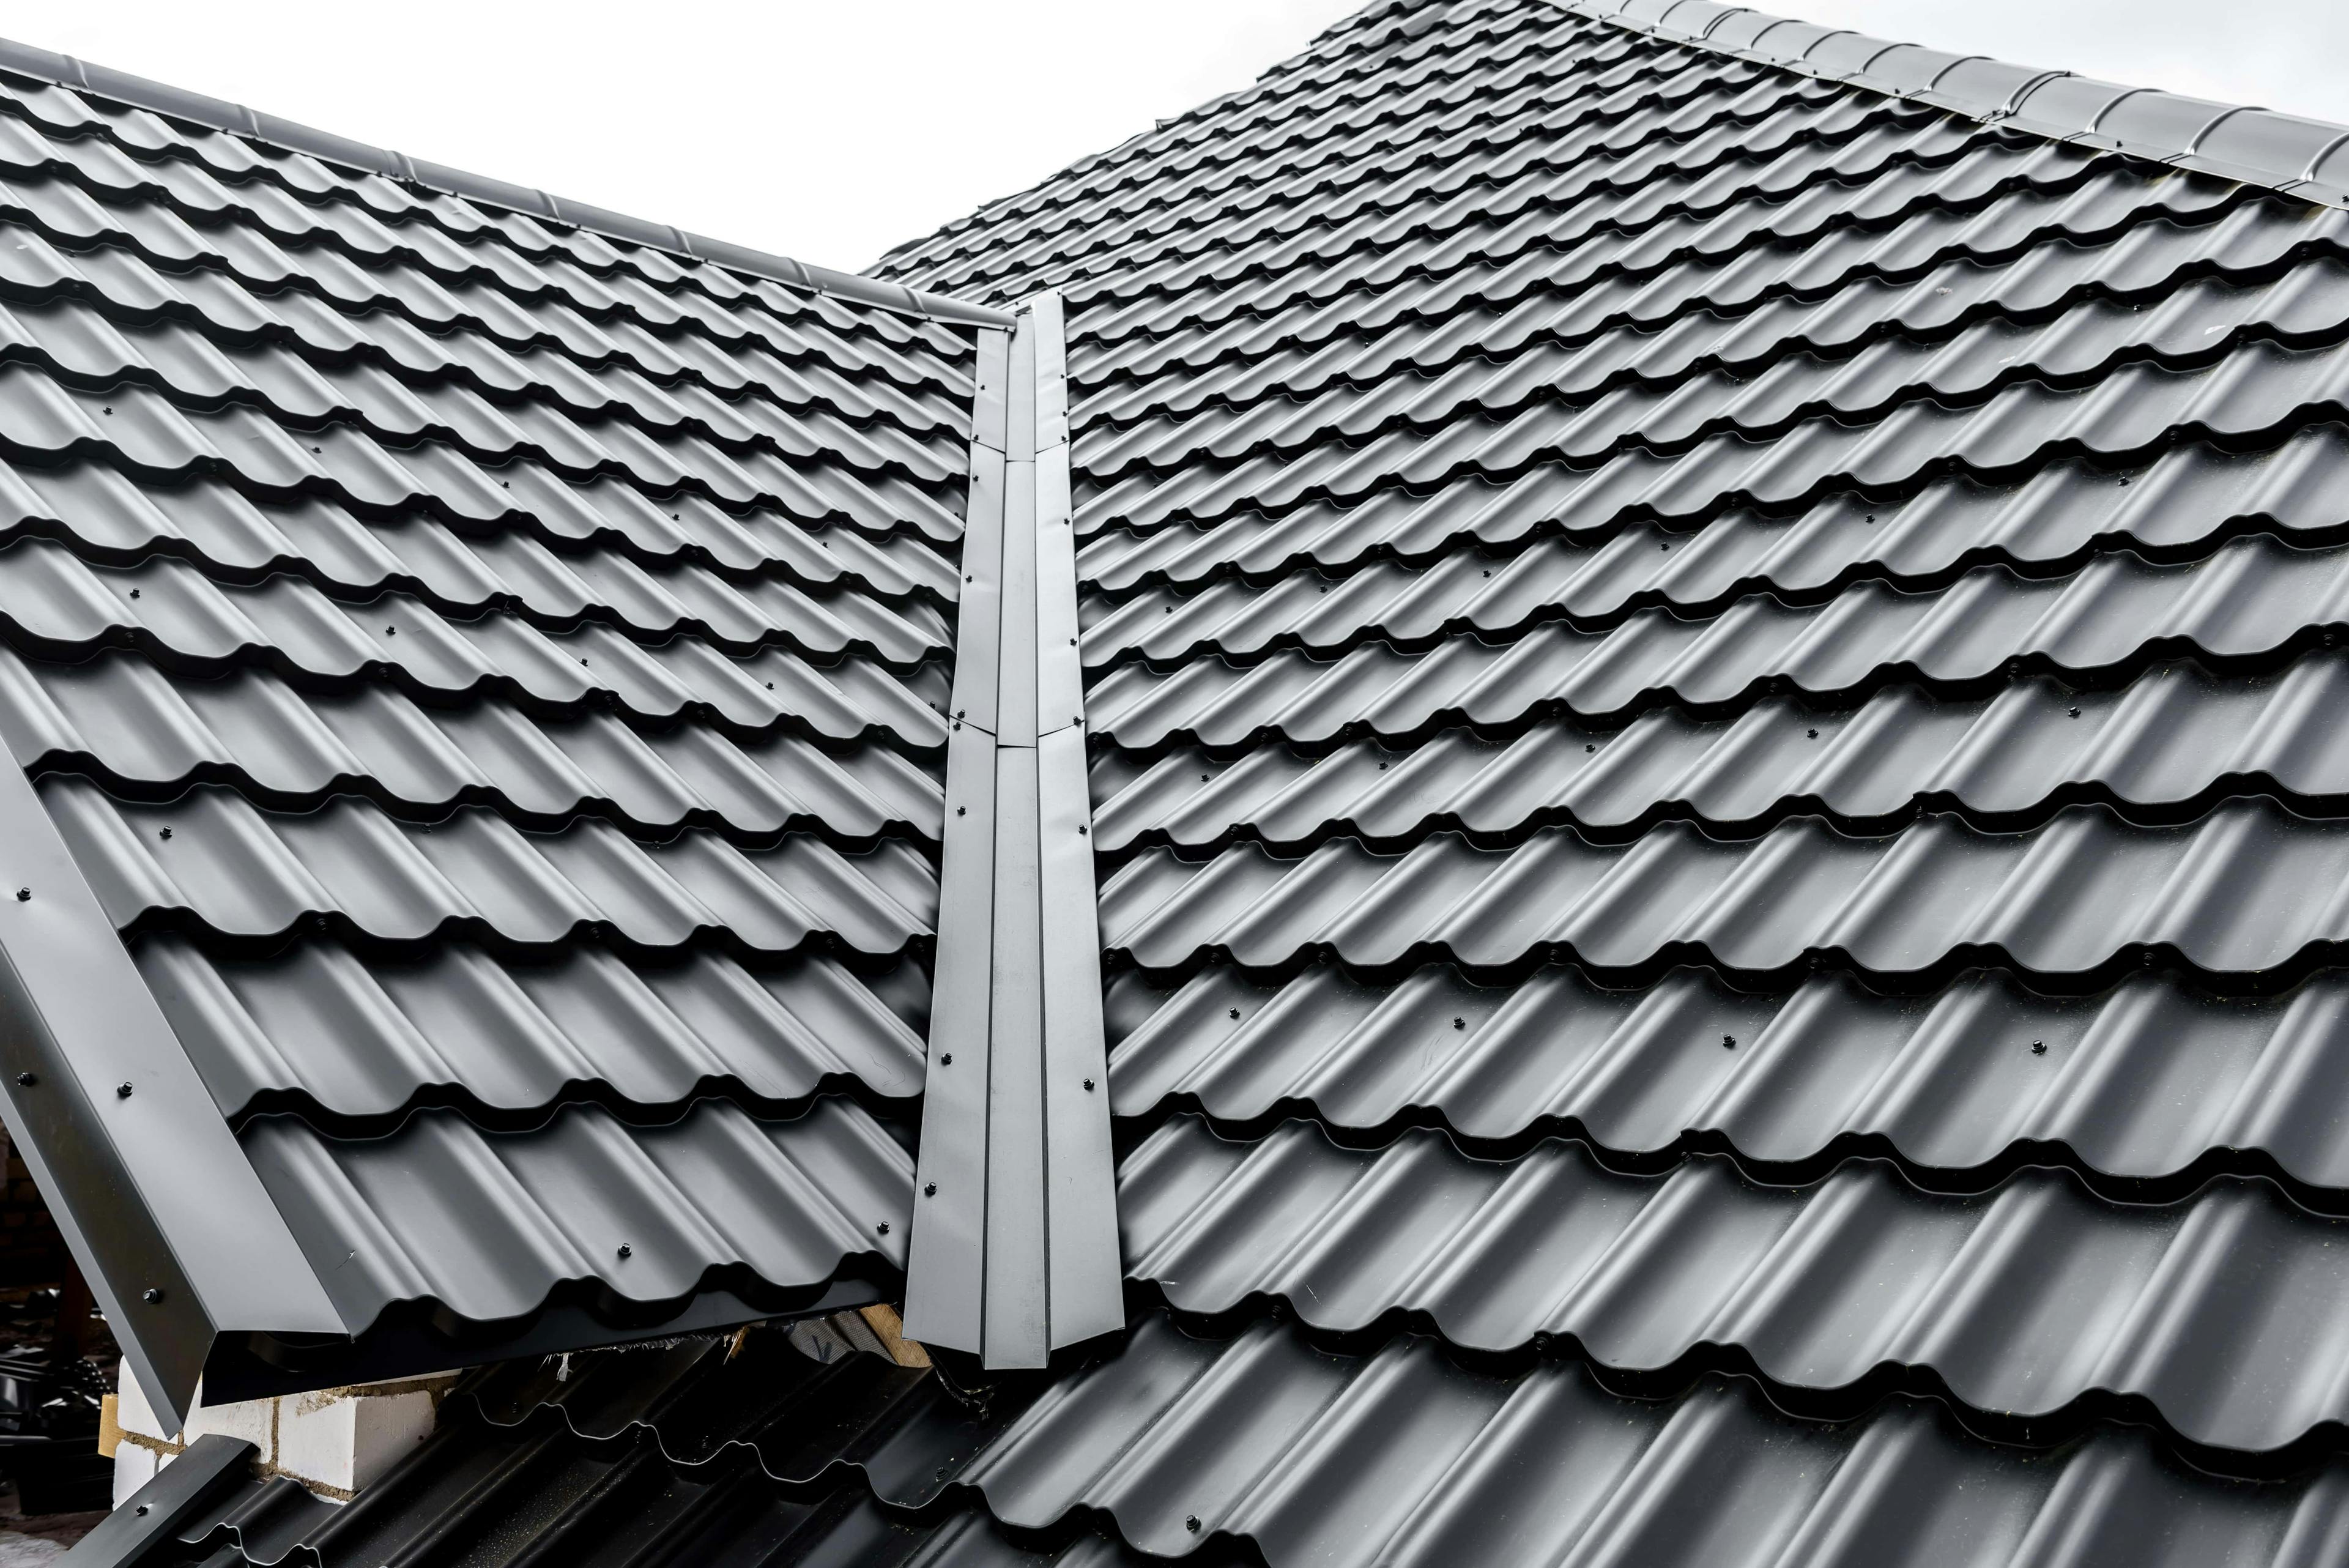 Metal Shingles | Residential Roofing Experts | Commercial Roofers | Durable Roofing Solutions